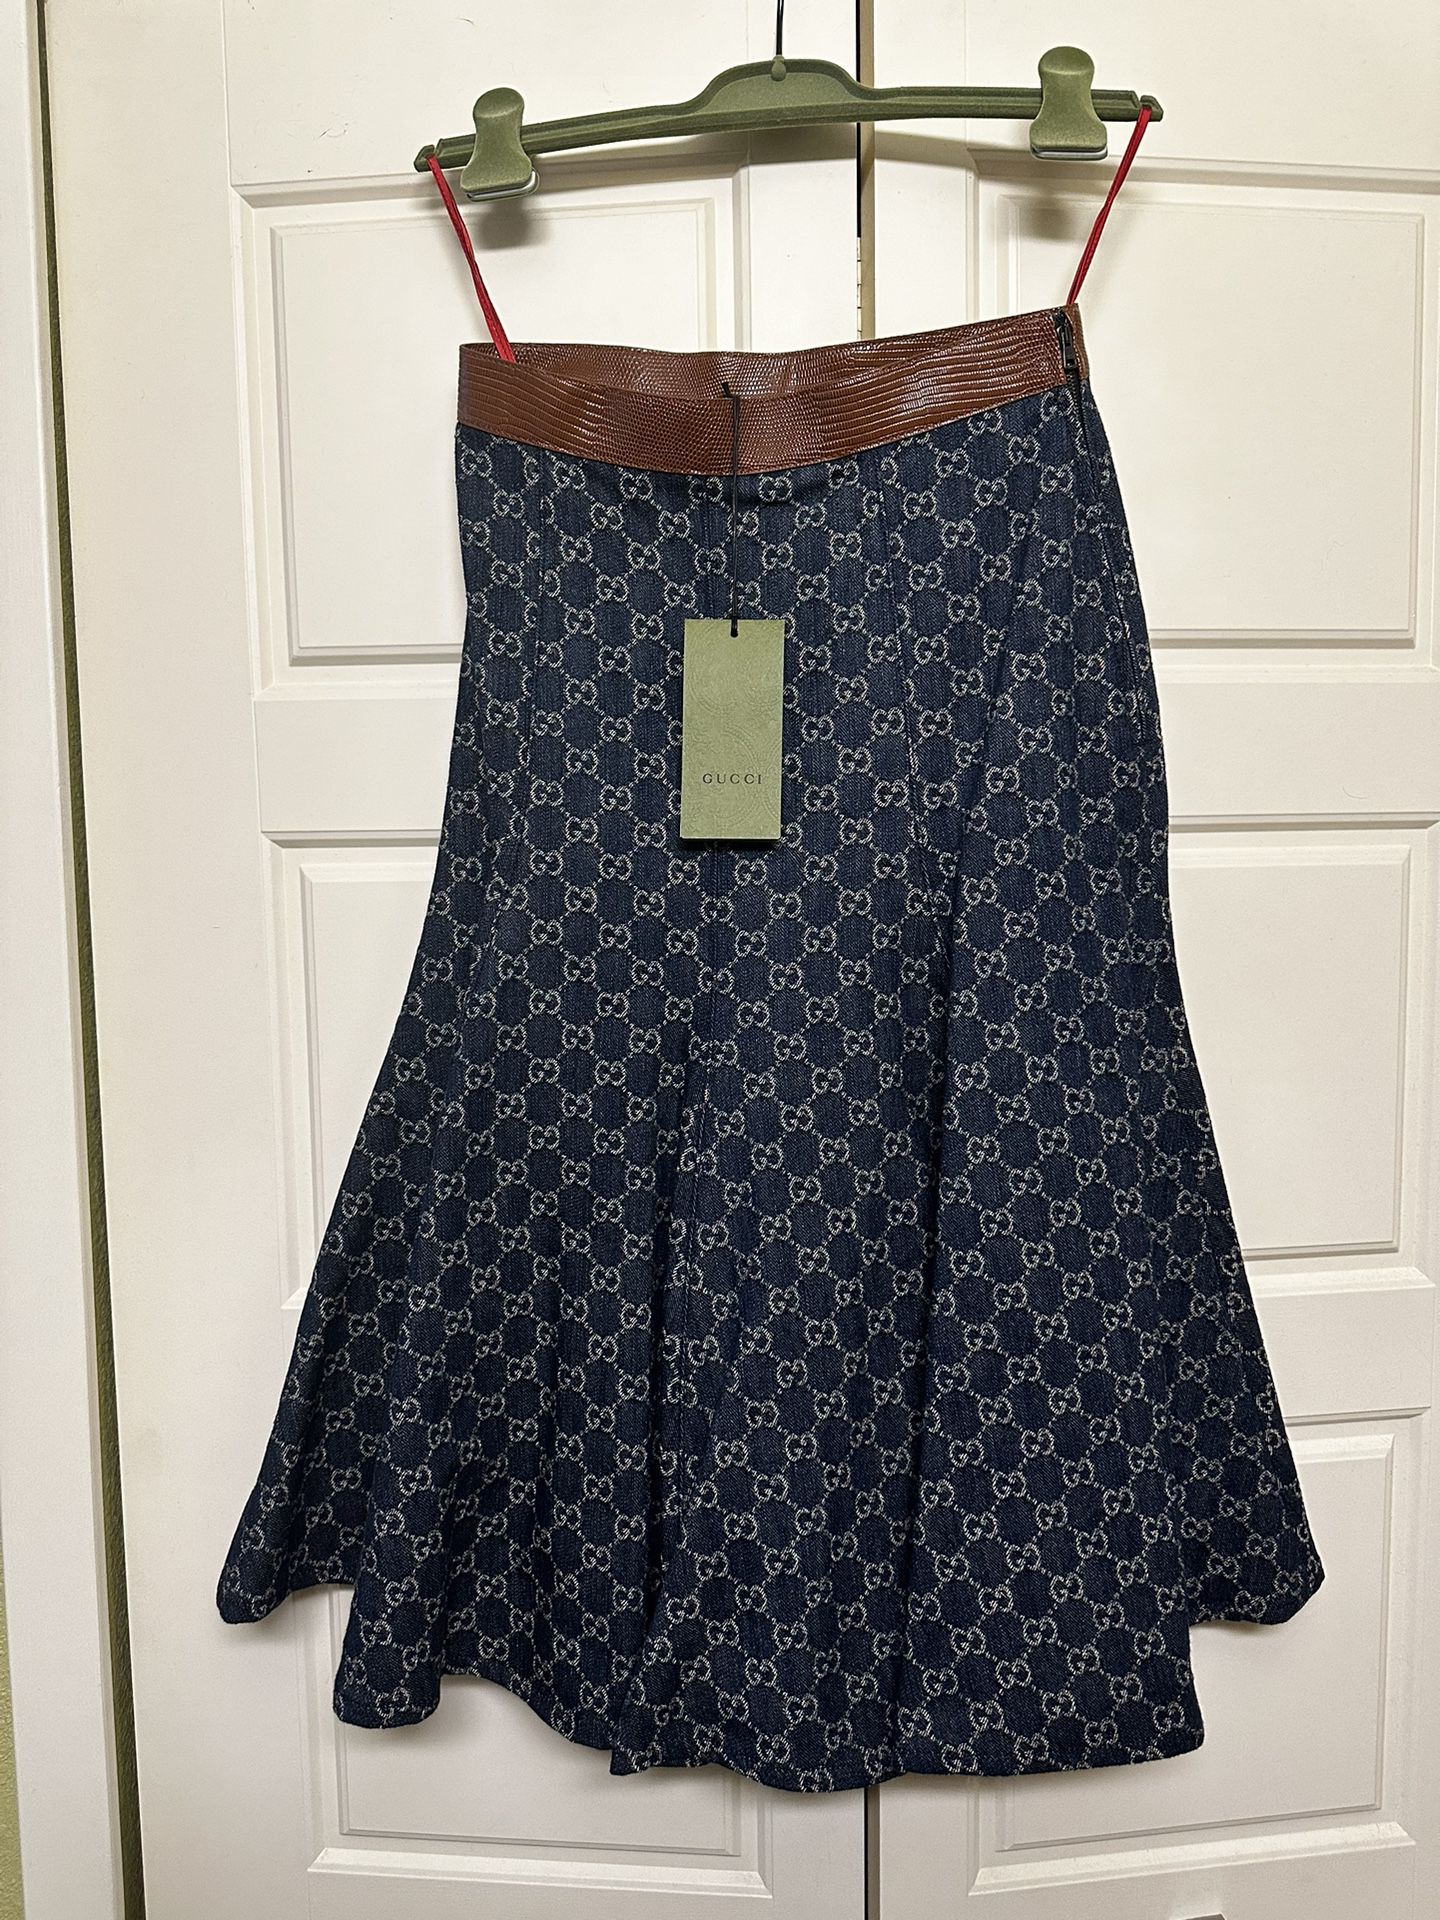 Gucci Denim Skirt - Brand New With Tags